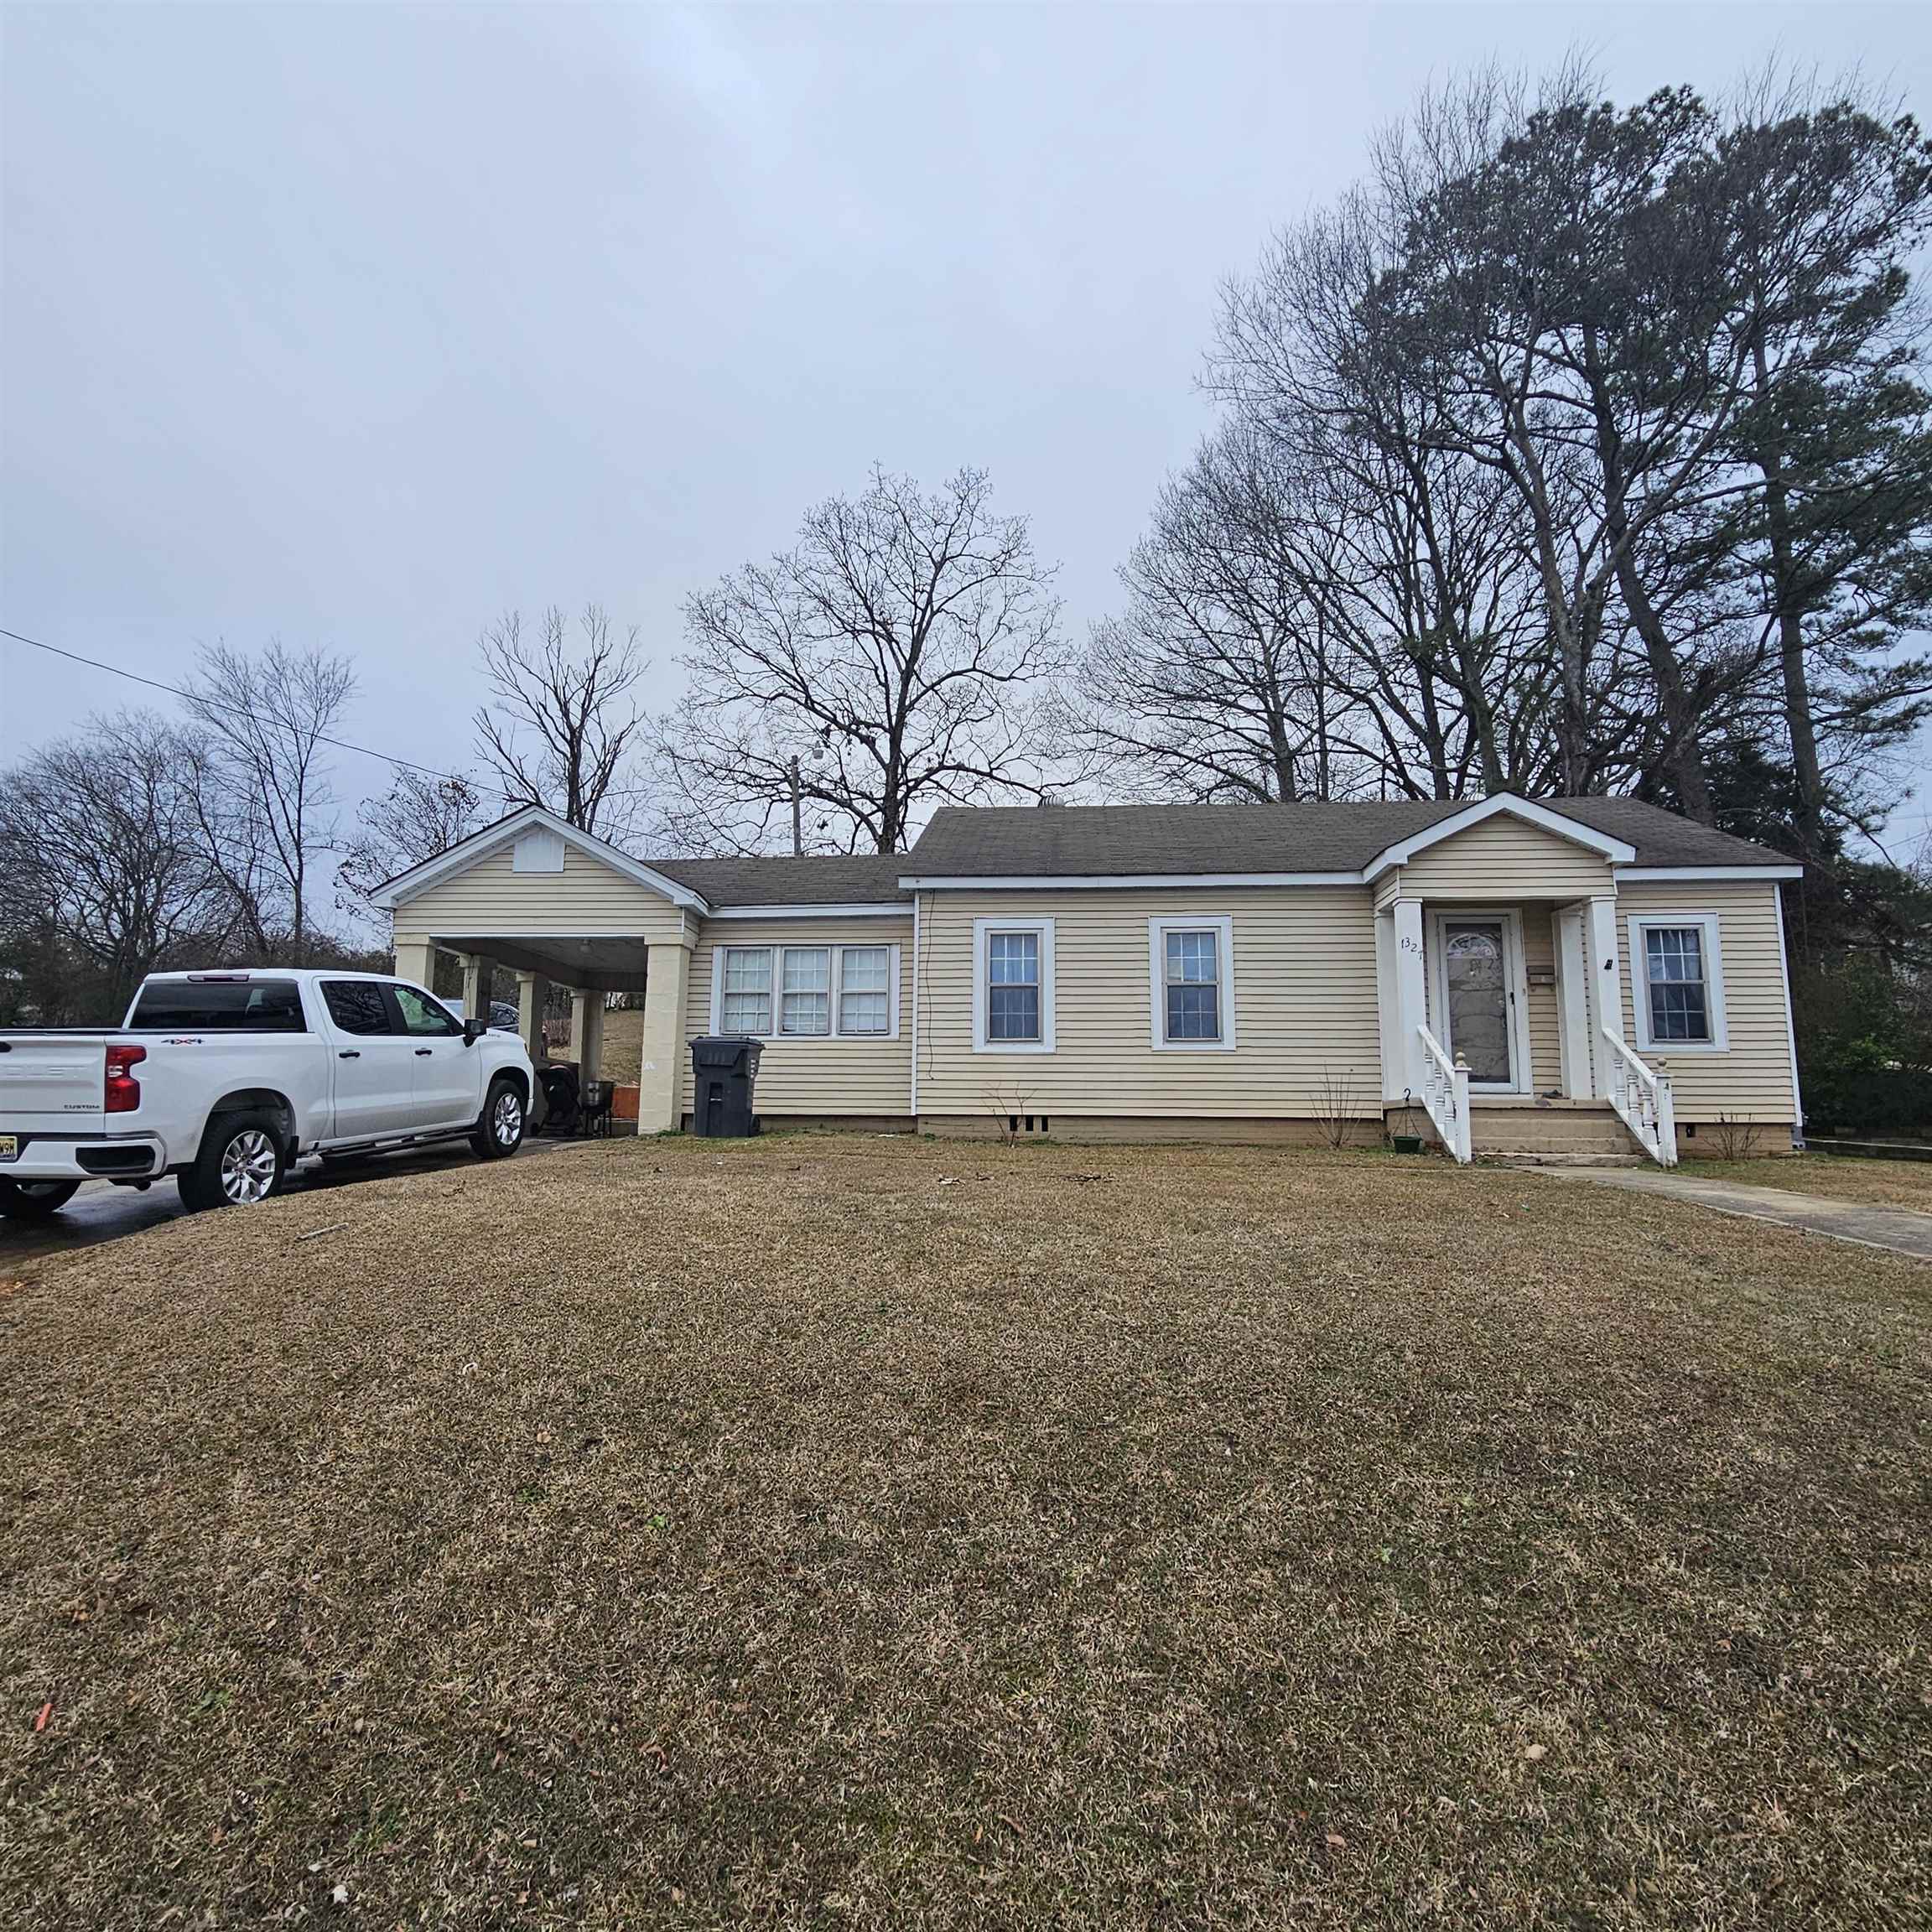 Adorable 2 bedroom, 1 bath home with an additional room that is currently being used as a 3rd bedroom.  Great location close to Russellville City Schools.  Hable Espanol.